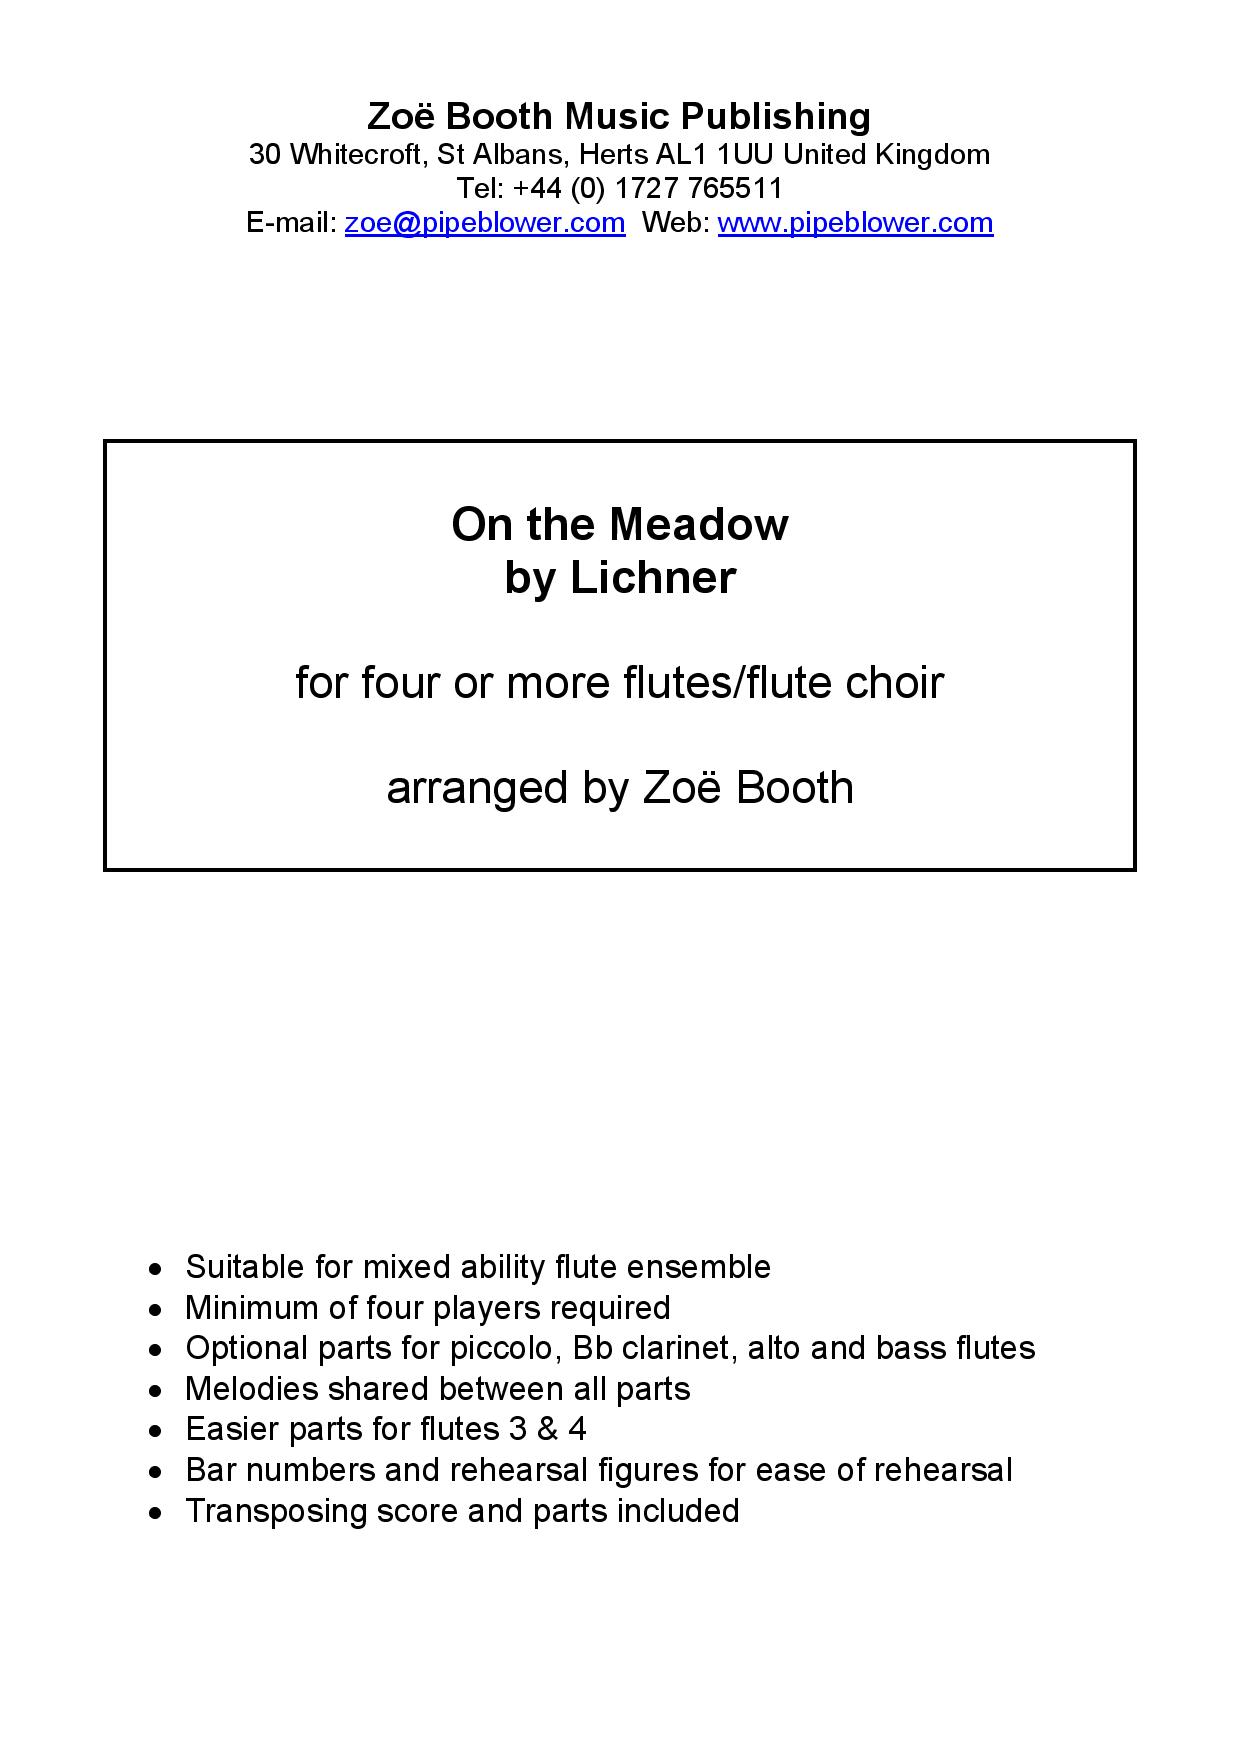 On the Meadow by Lichner,  arranged by Zoë Booth for four or more flutes/flute choir